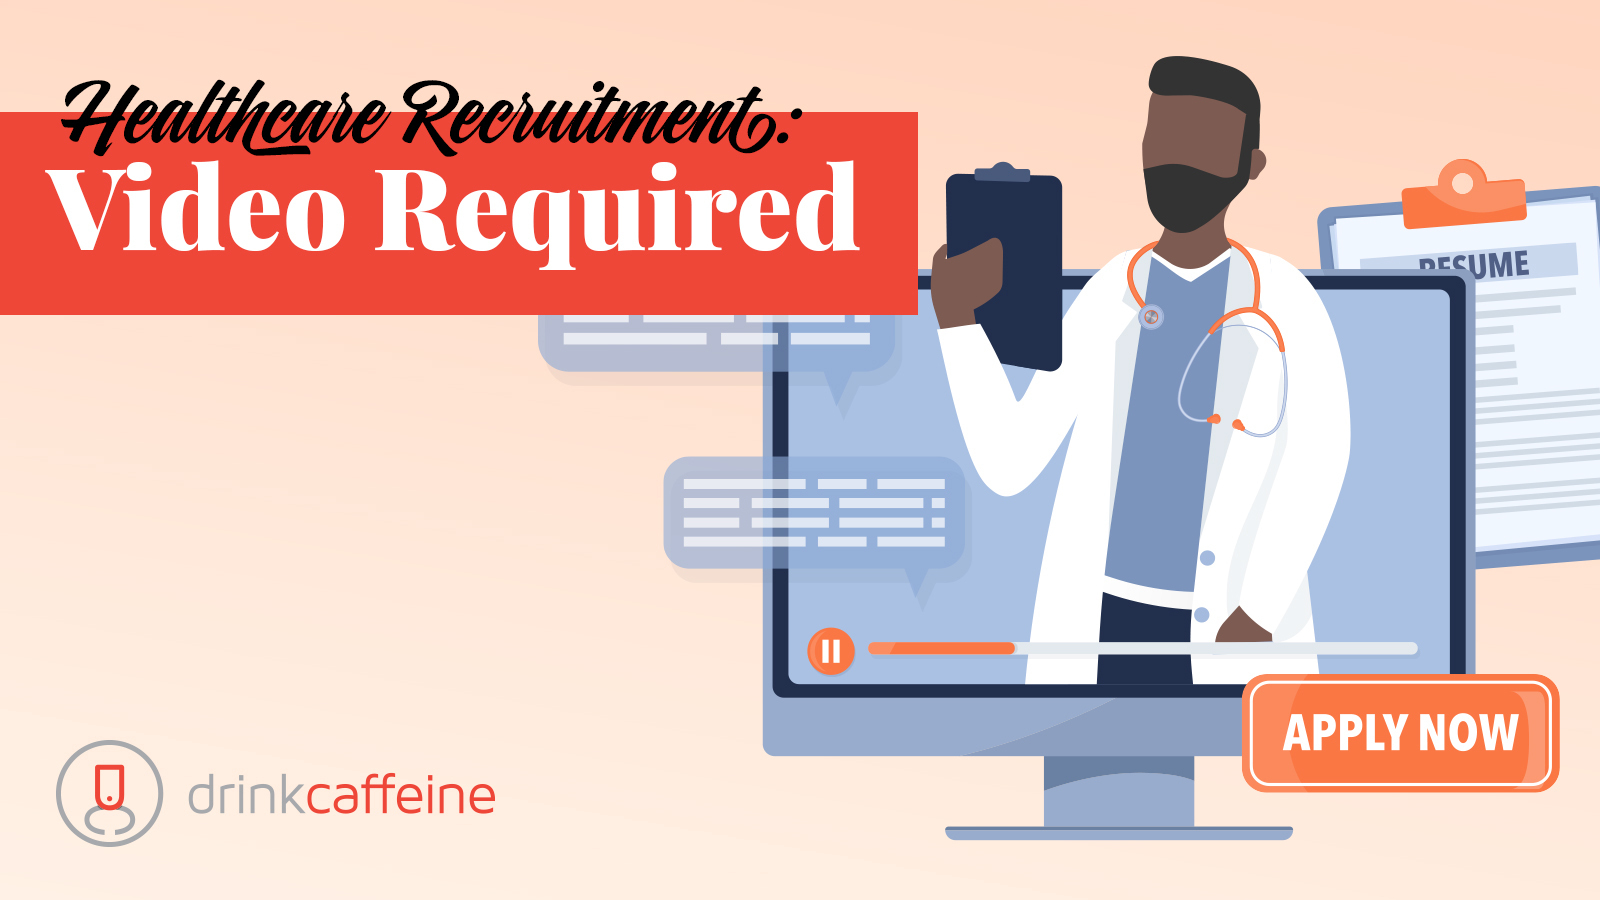 Healthcare Recruitment: Video Required blog image